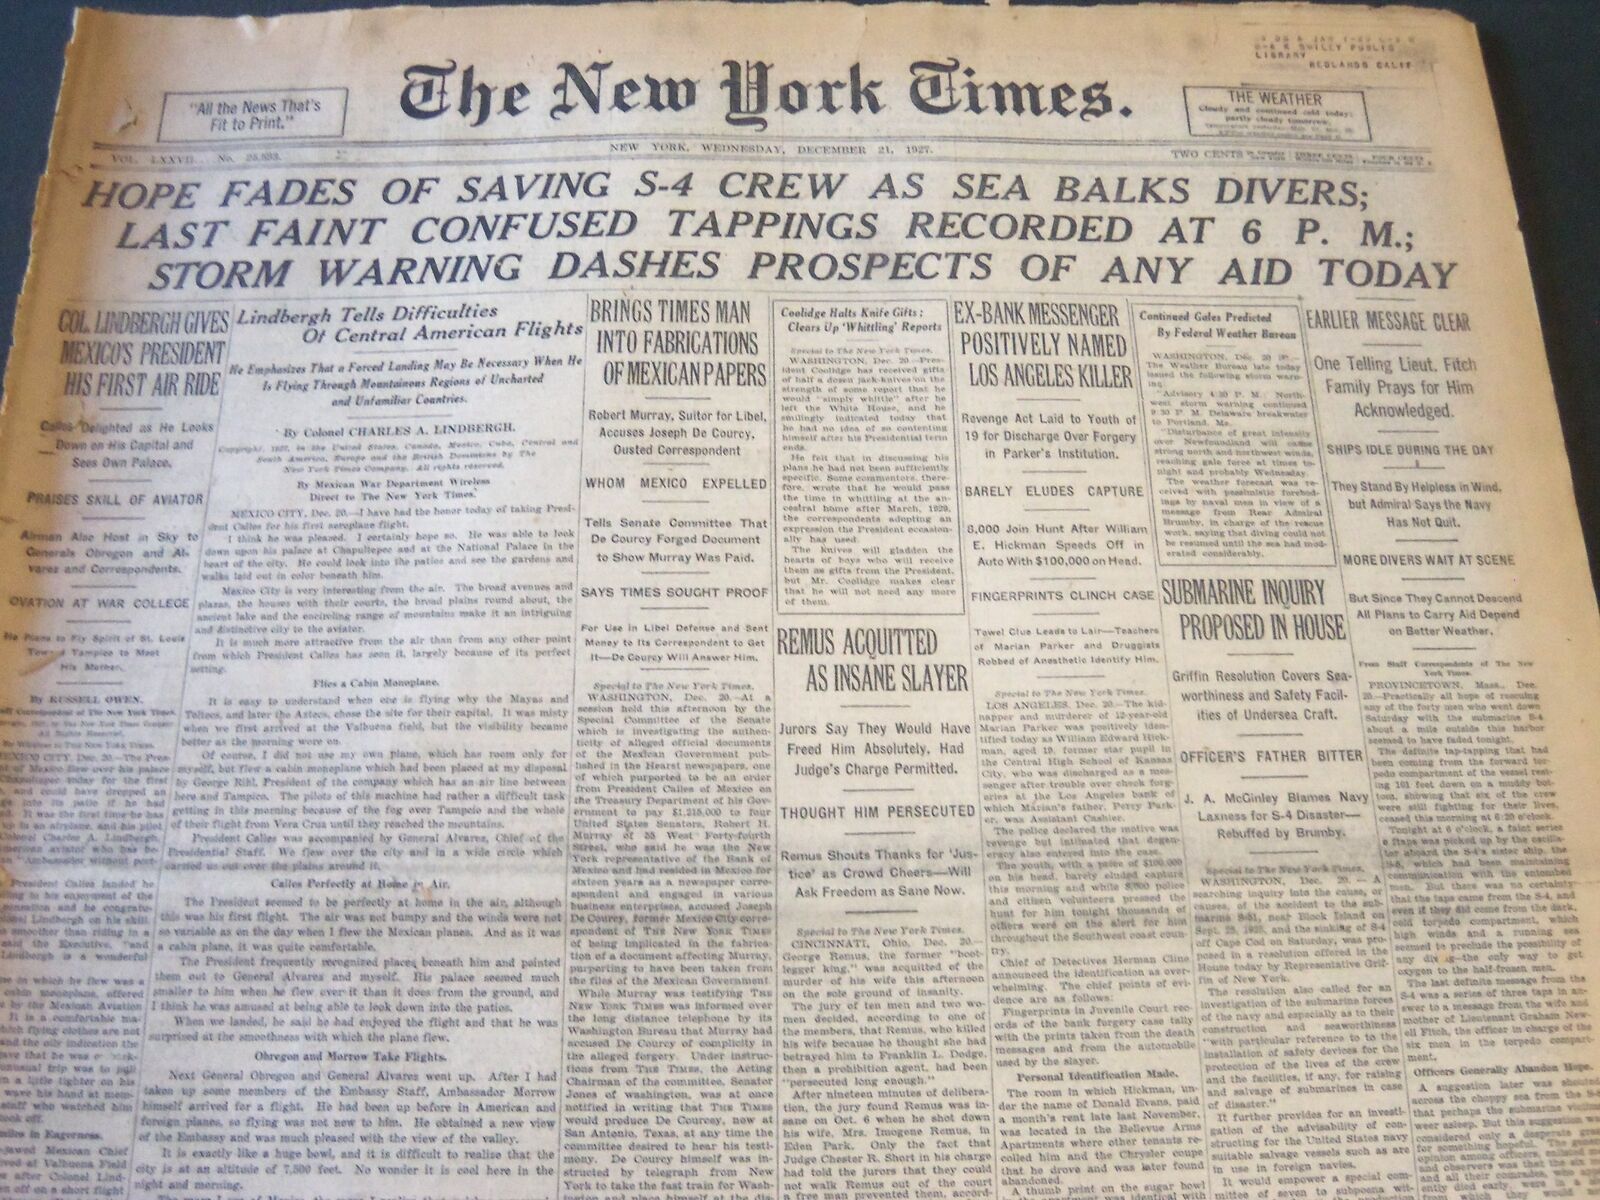 1927 DECEMBER 21 NEW YORK TIMES - HOPE FADES OF SAVING S-4 CREW - NT 6304